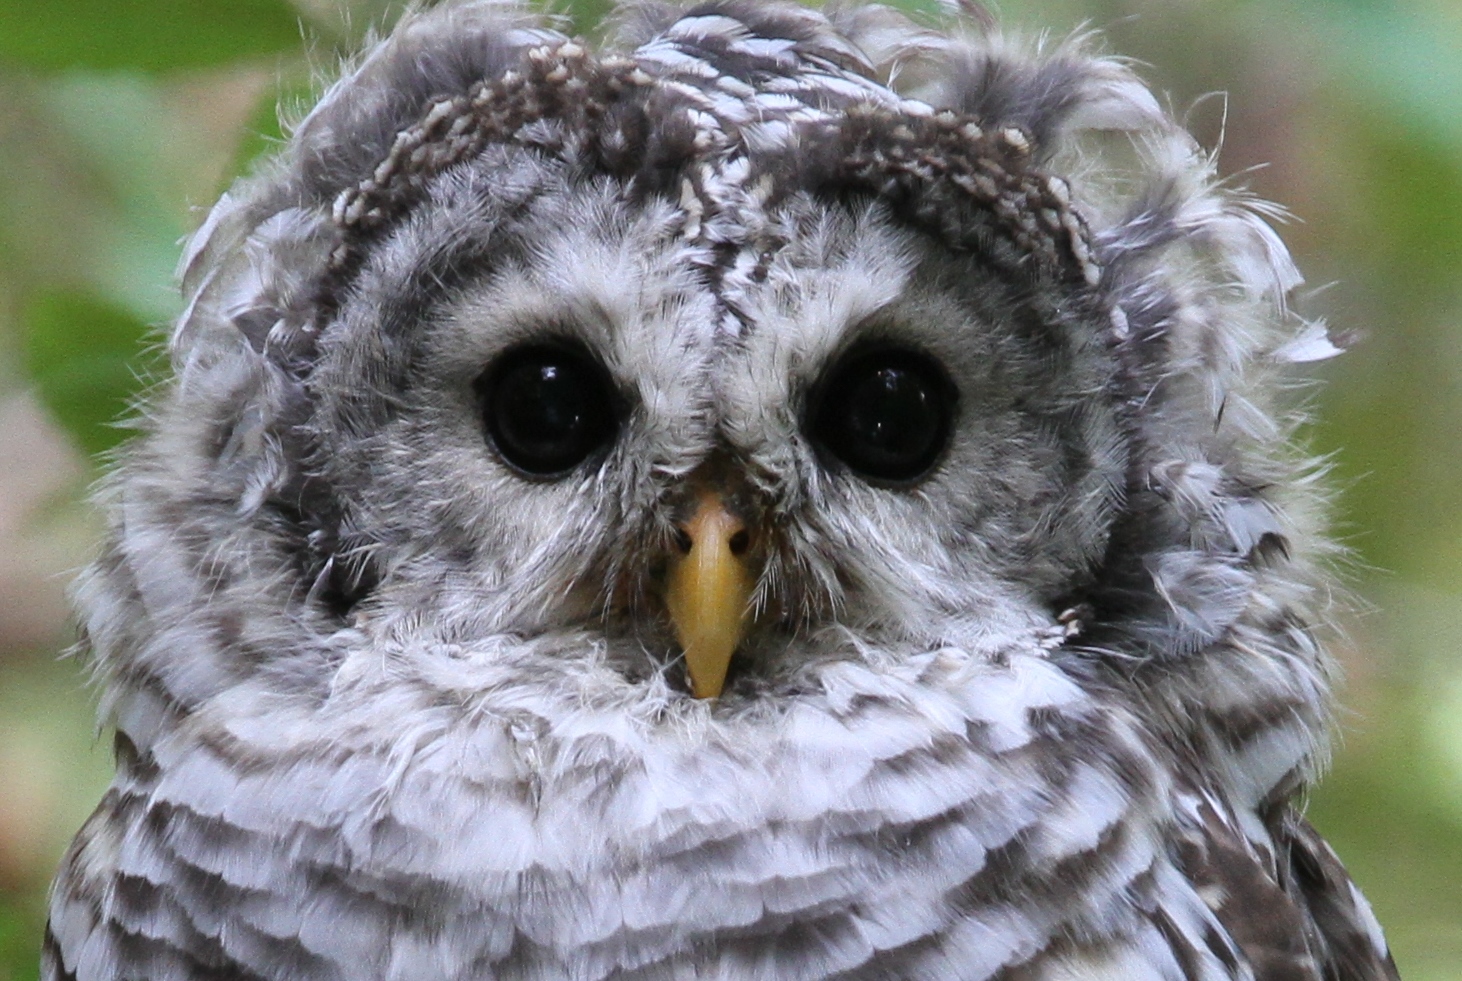 Am adorable young barred owl will be featured high in the tree!